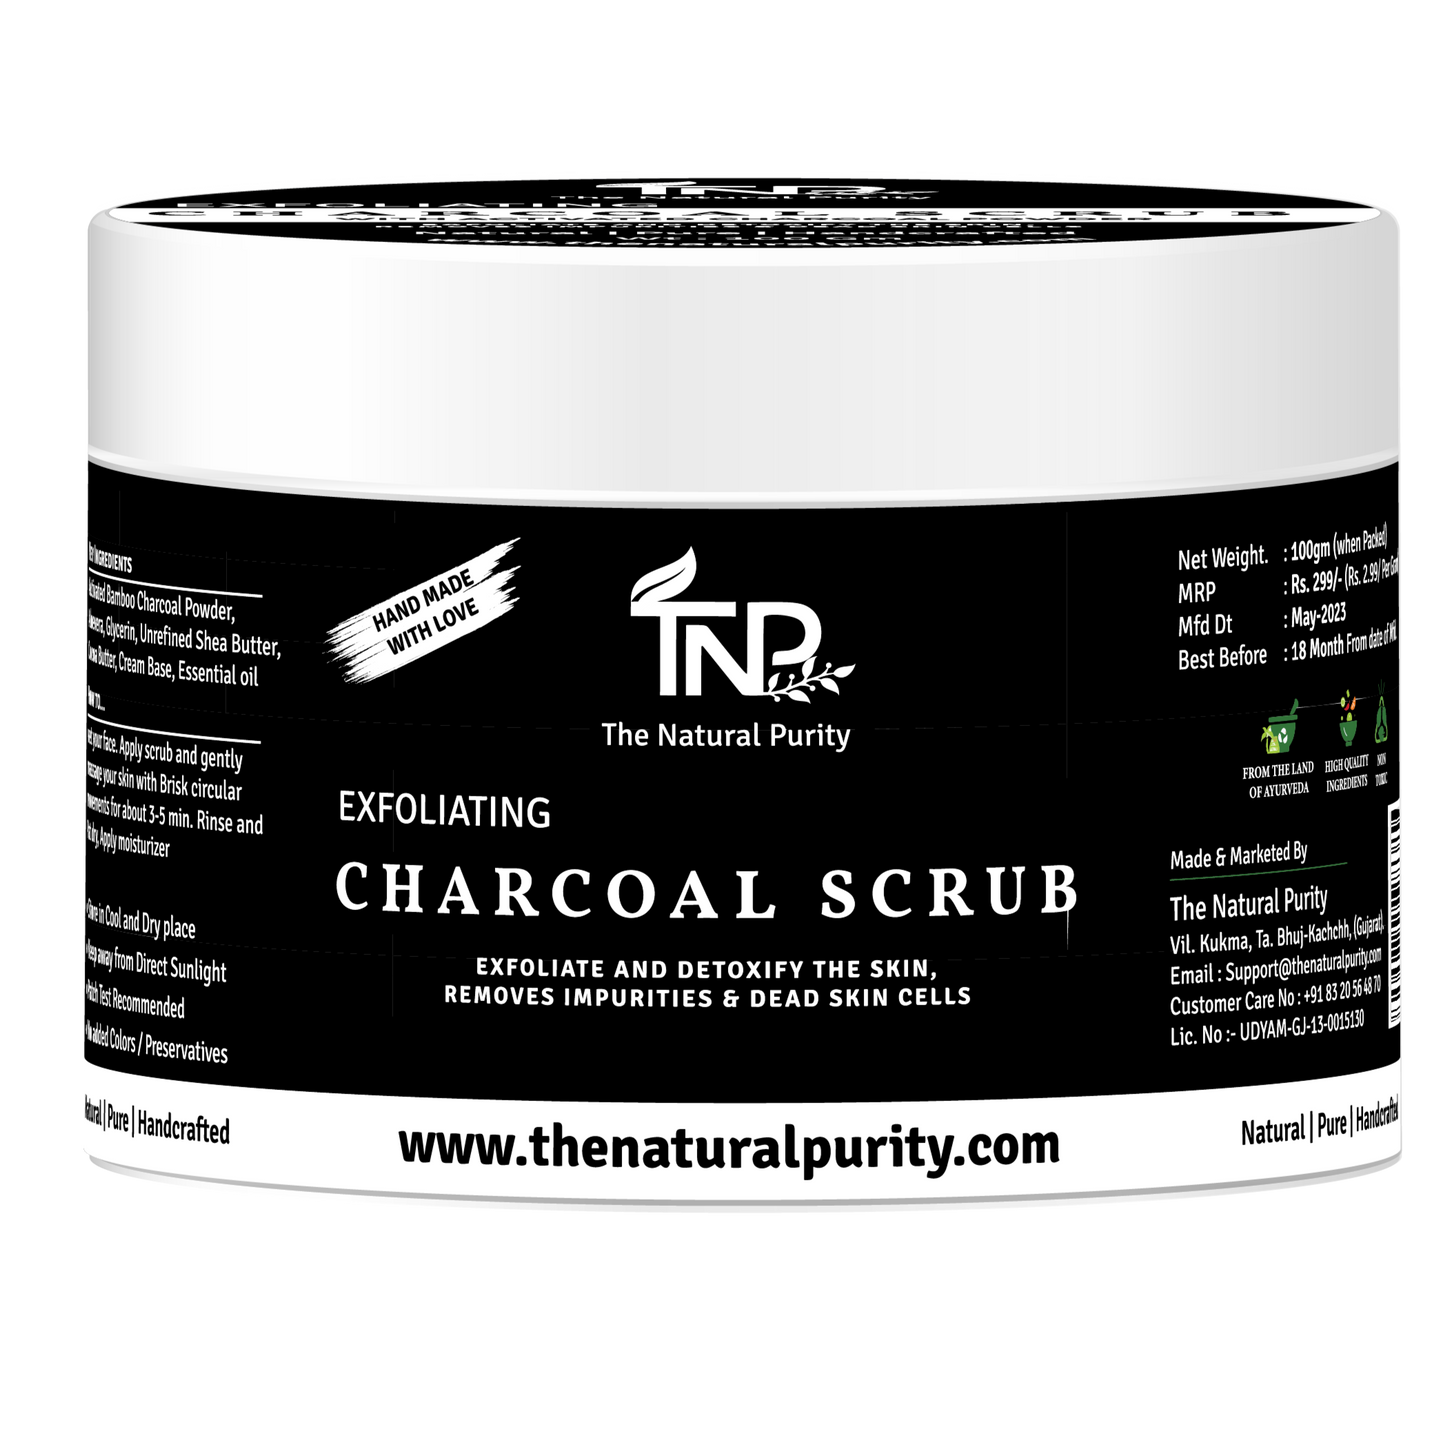 Activated Charcoal Scrub For Exfoliation, Oil Control & Deep Cleansing